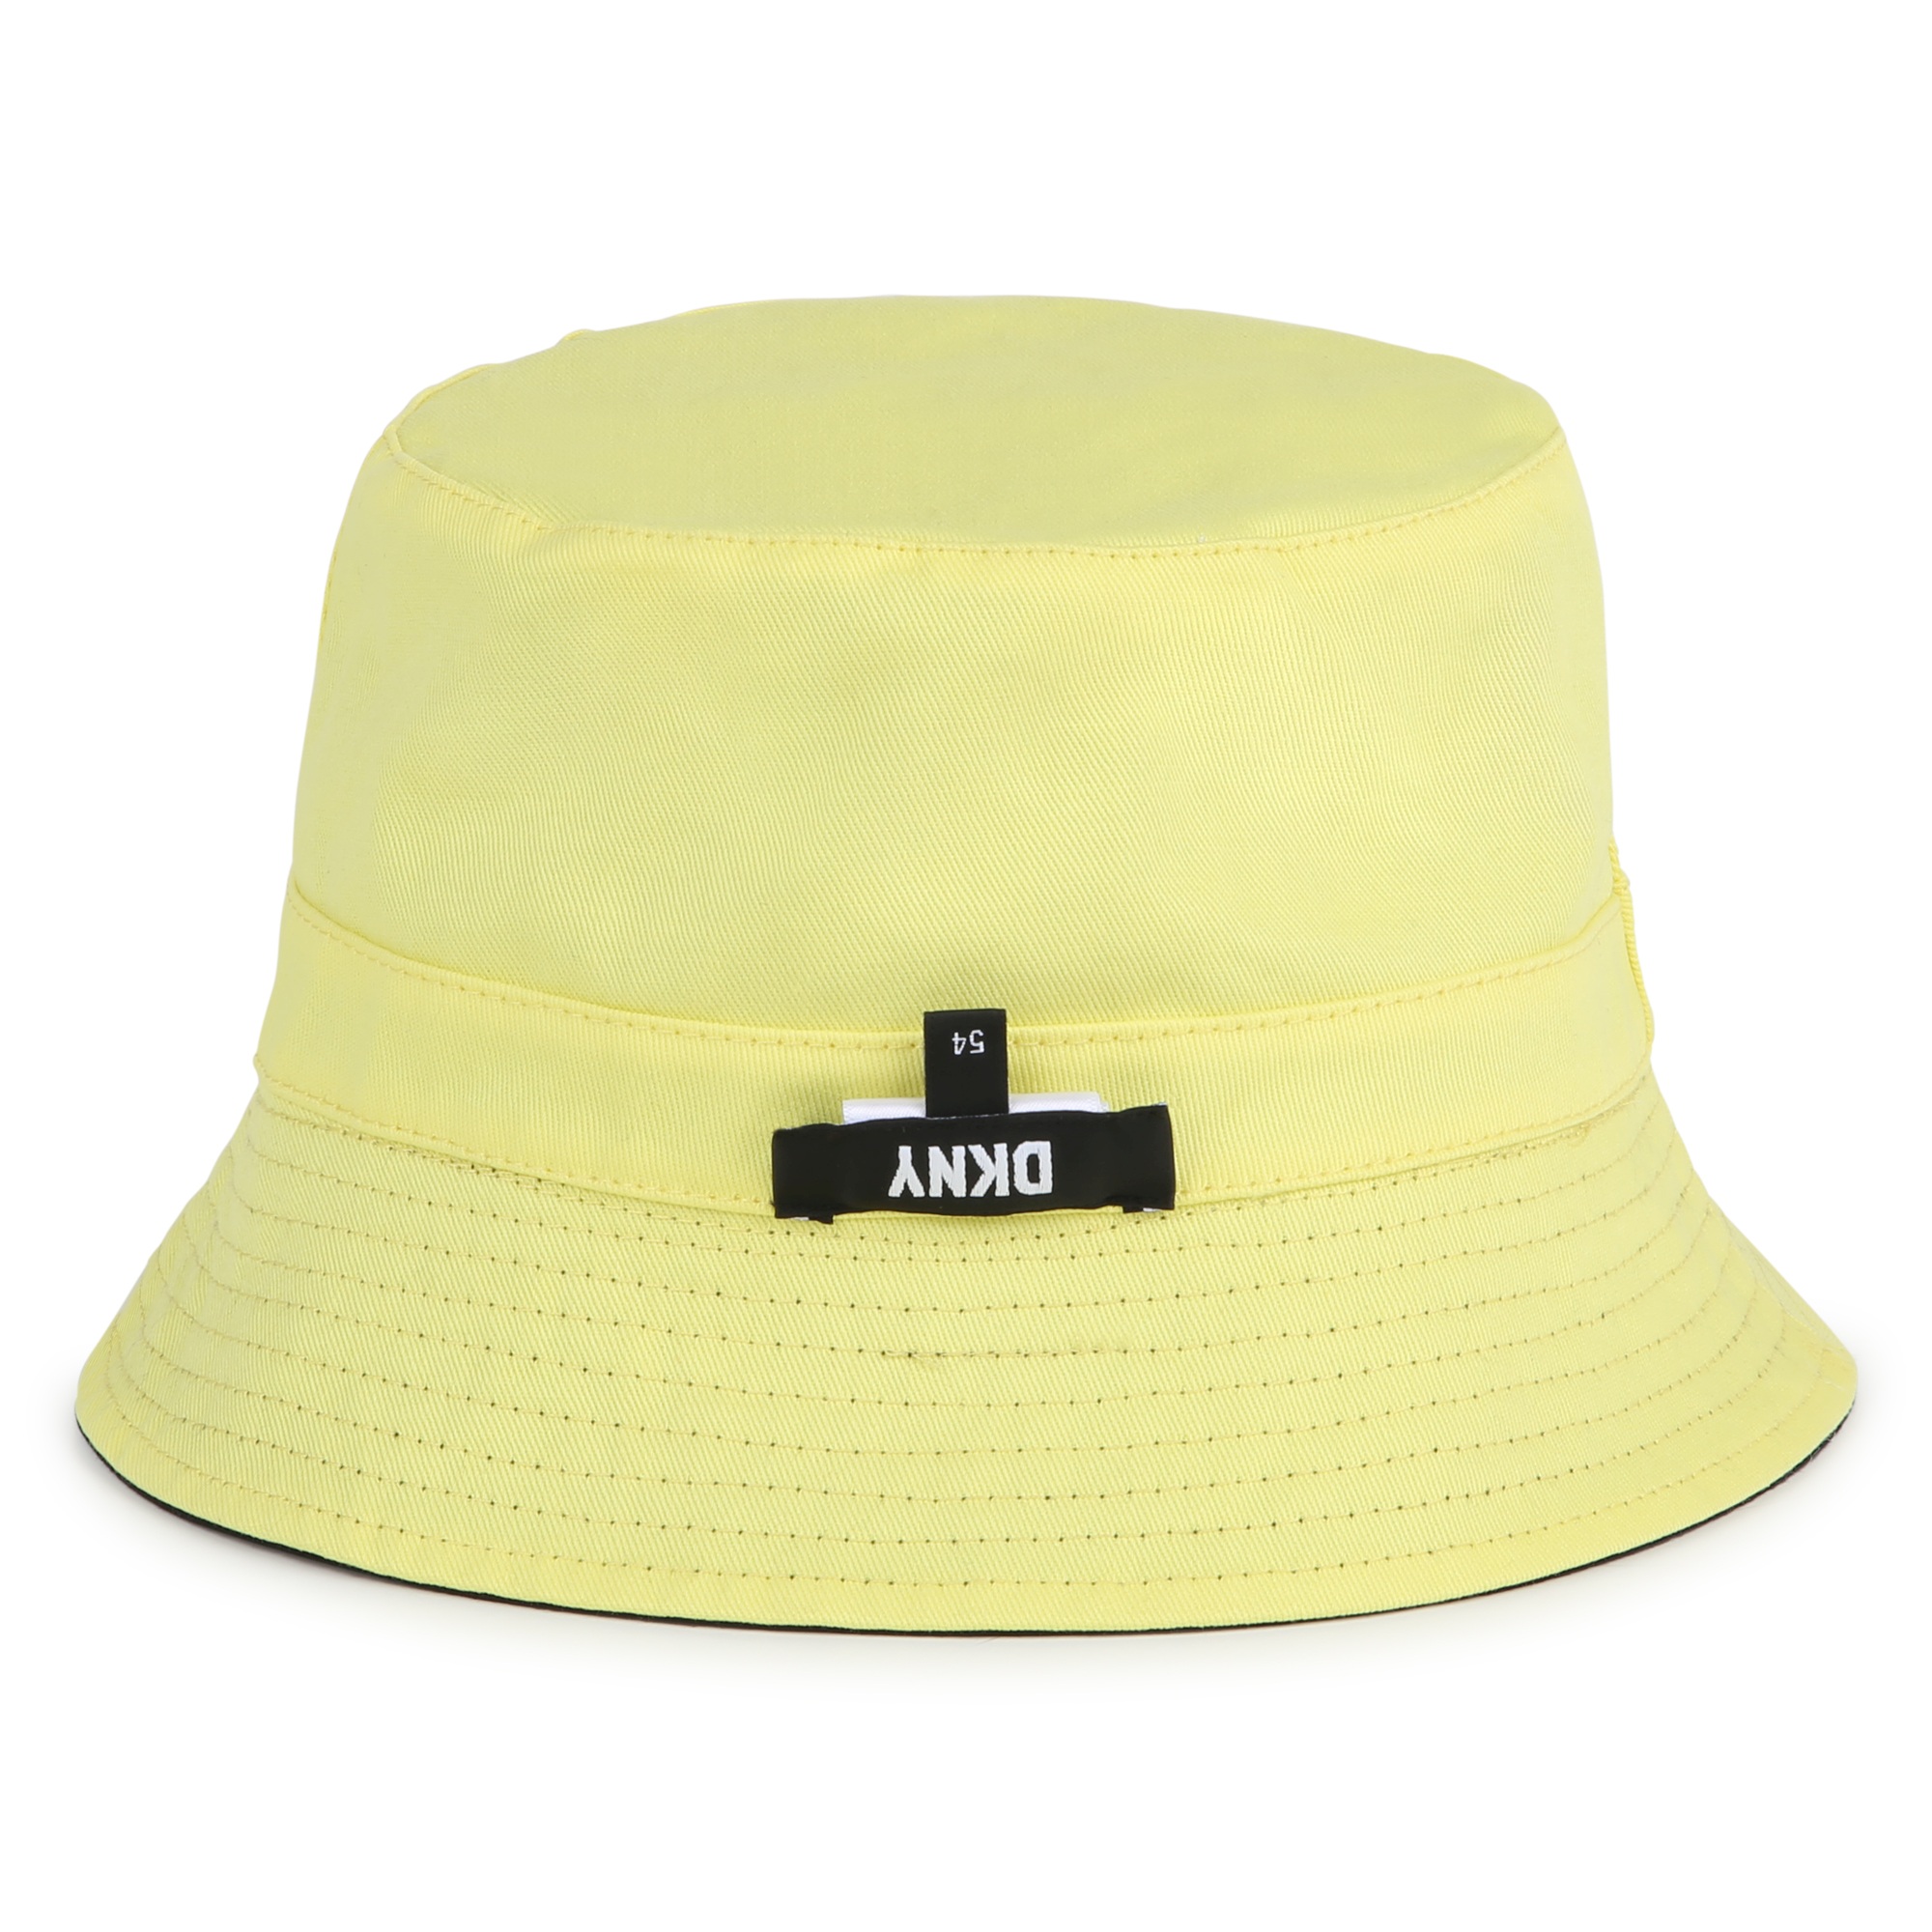 Lined reversible bucket hat DKNY for UNISEX